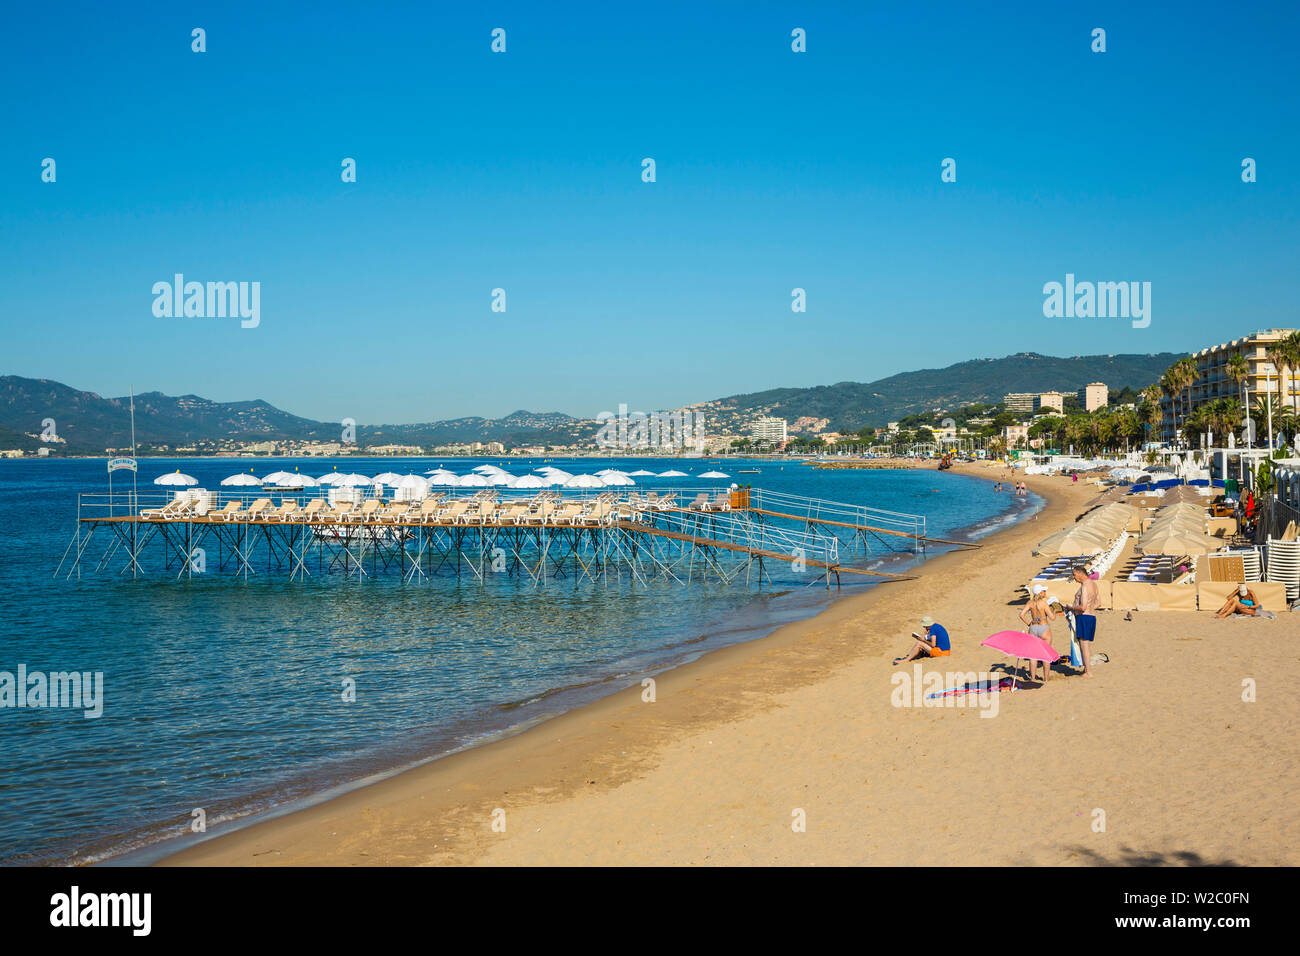 Beach in Cannes, Alpes-Maritimes, Provence-Alpes-Cote D'Azur, French Riviera, France Stock Photo